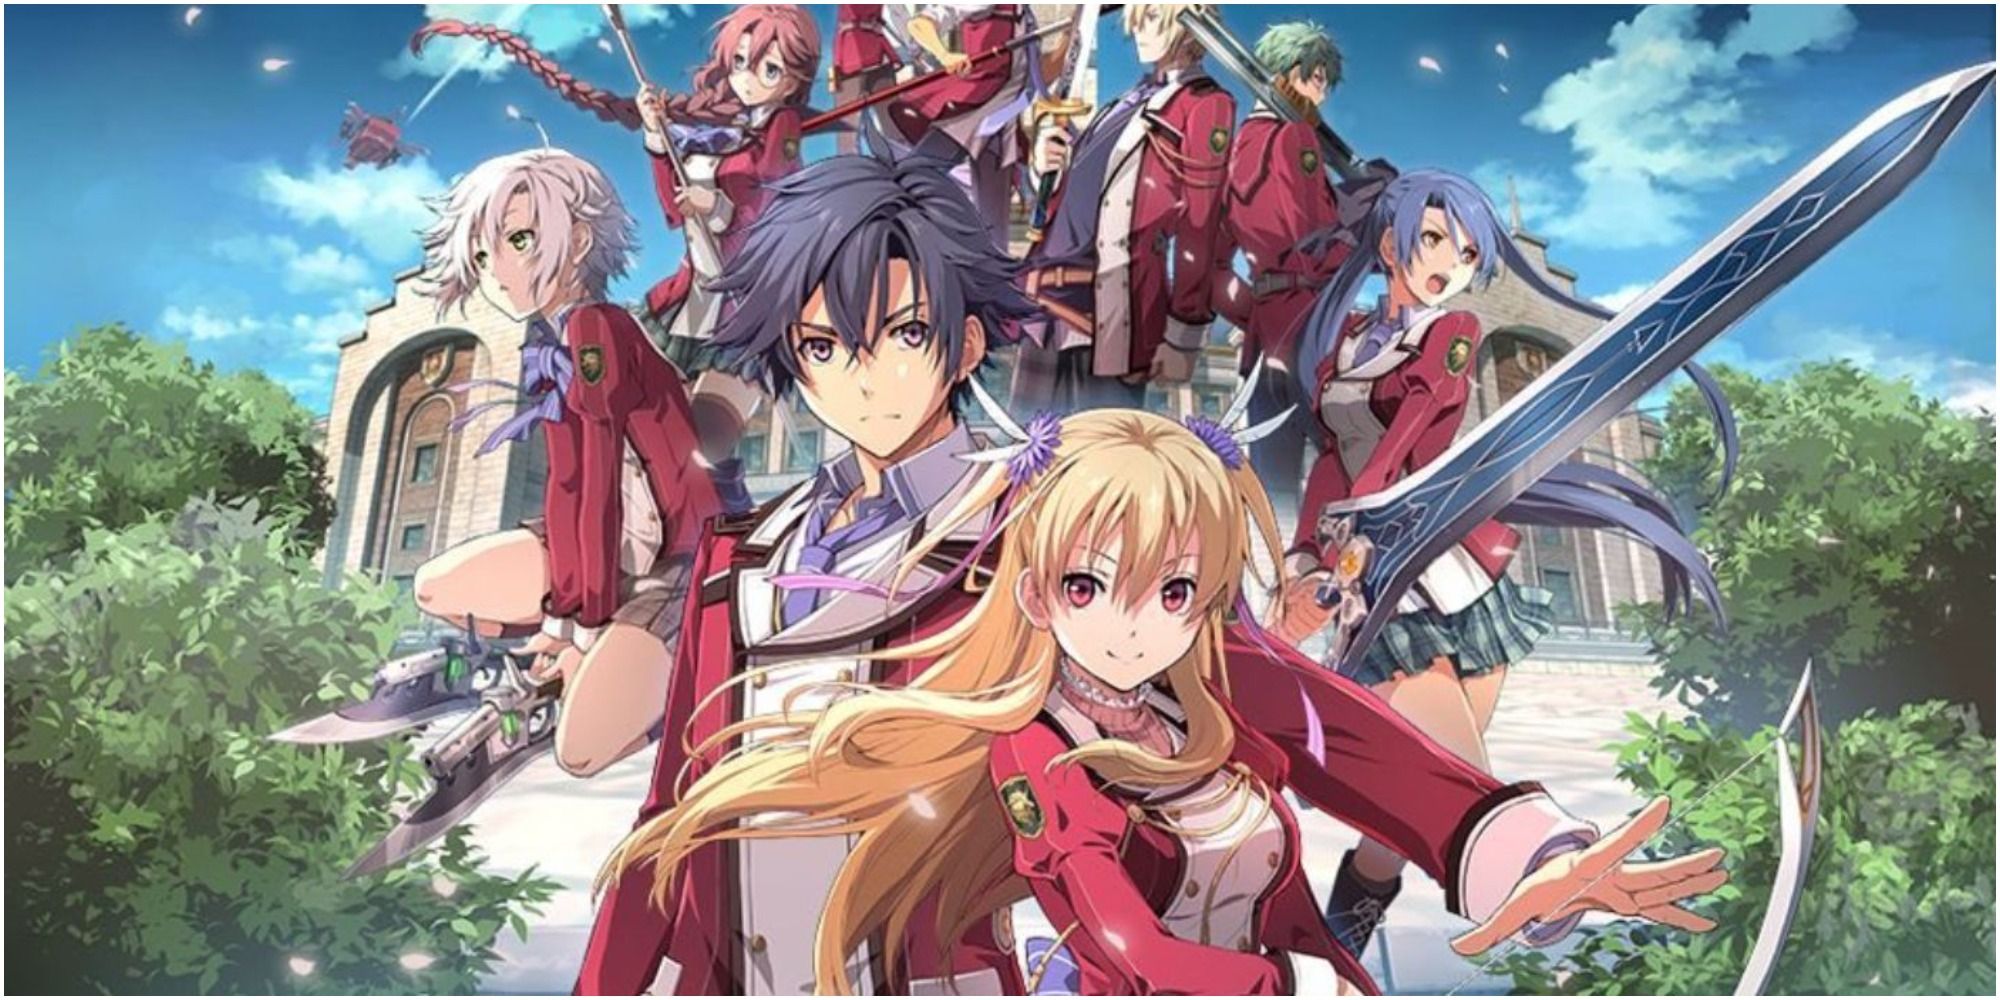 Main cast of Trails of Cold Steel cover art